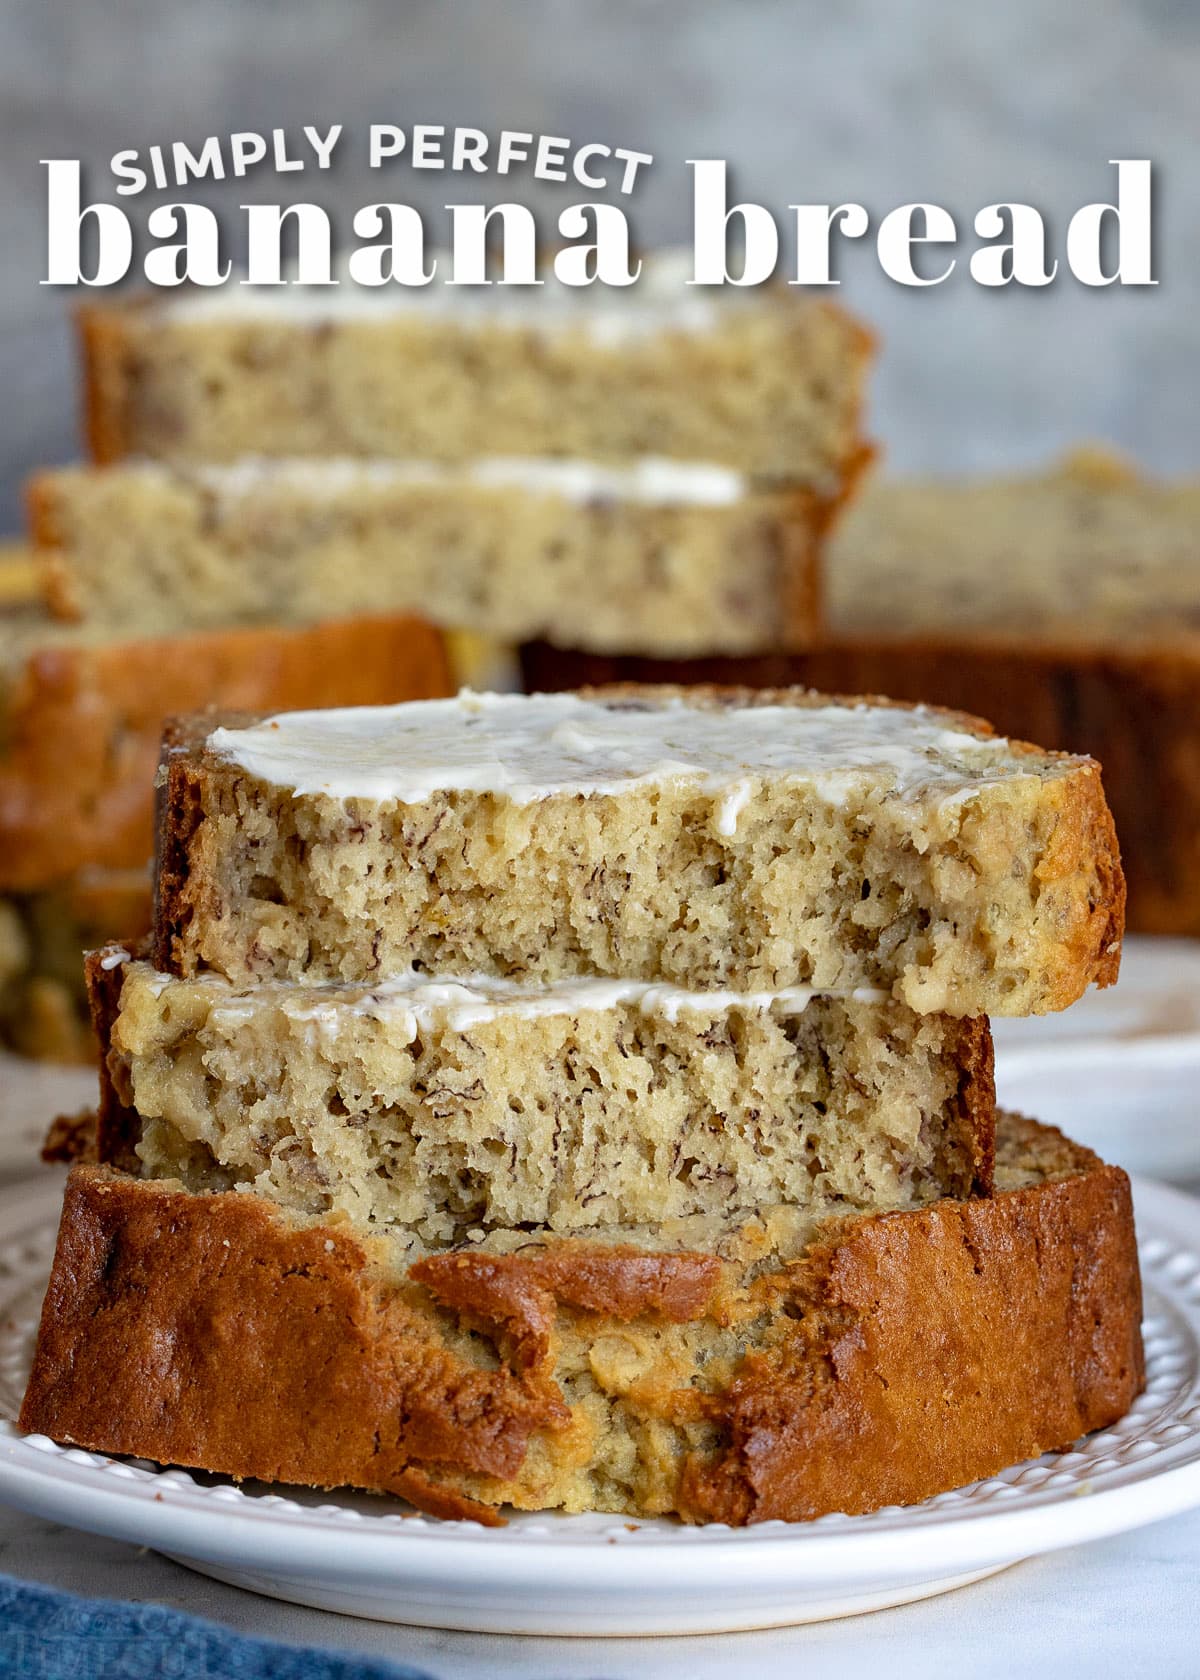 banana bread slice torn in half buttered and sitting on another slice of banana bread. title overlay at top of image.